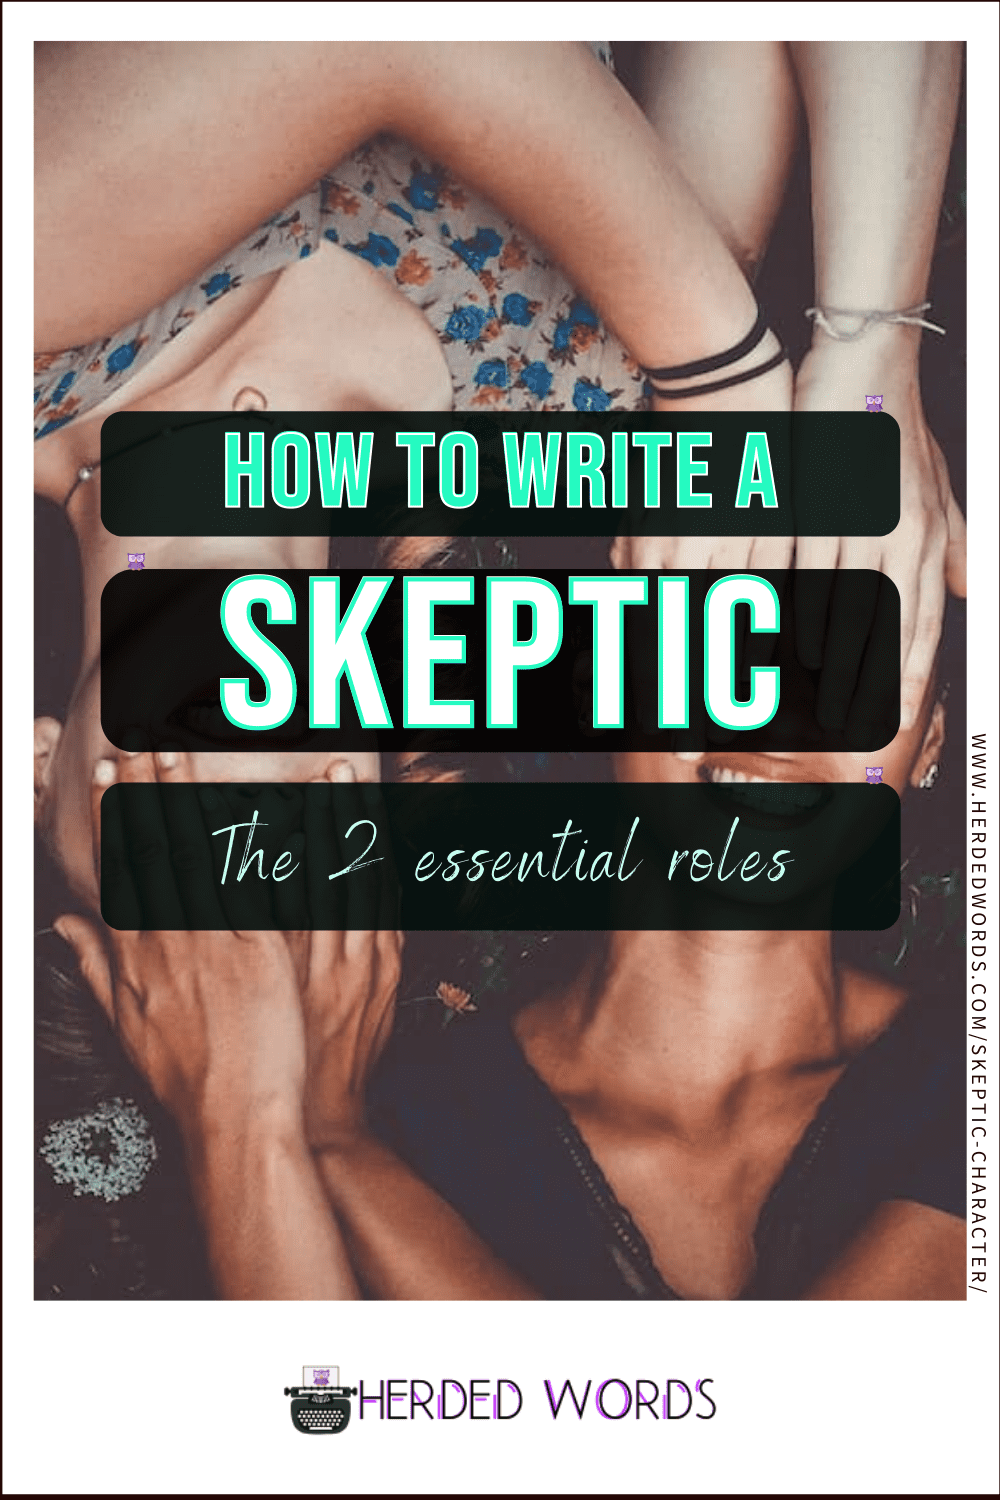 Image link to how to write a skeptic (the 2 essential roles)